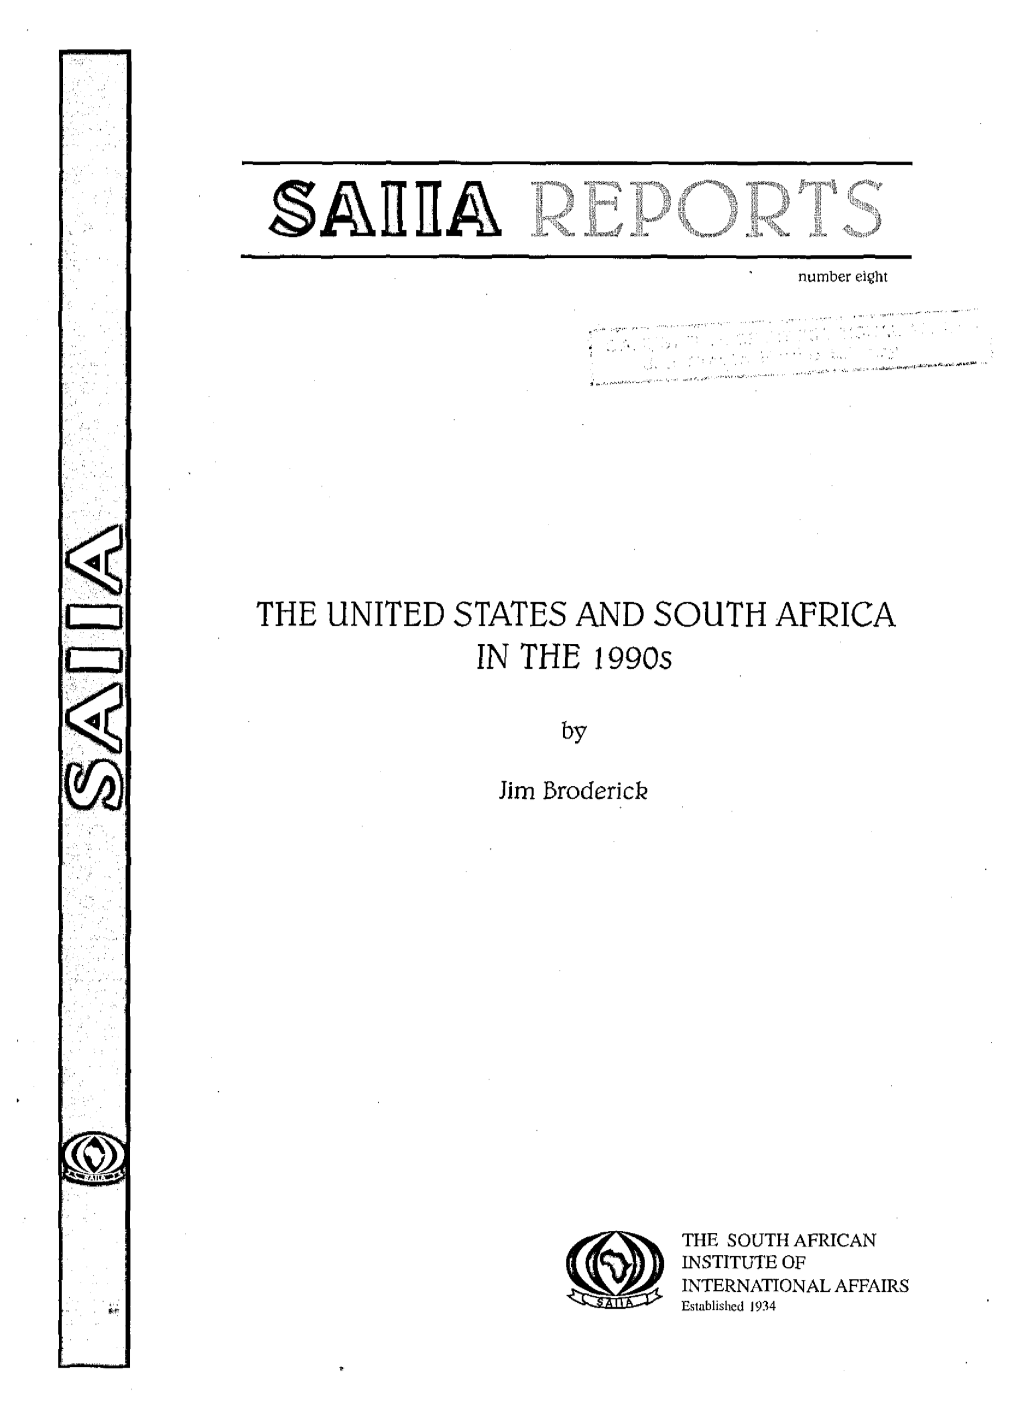 THE UNITED STATES and SOUTH AFRICA in the 1990S